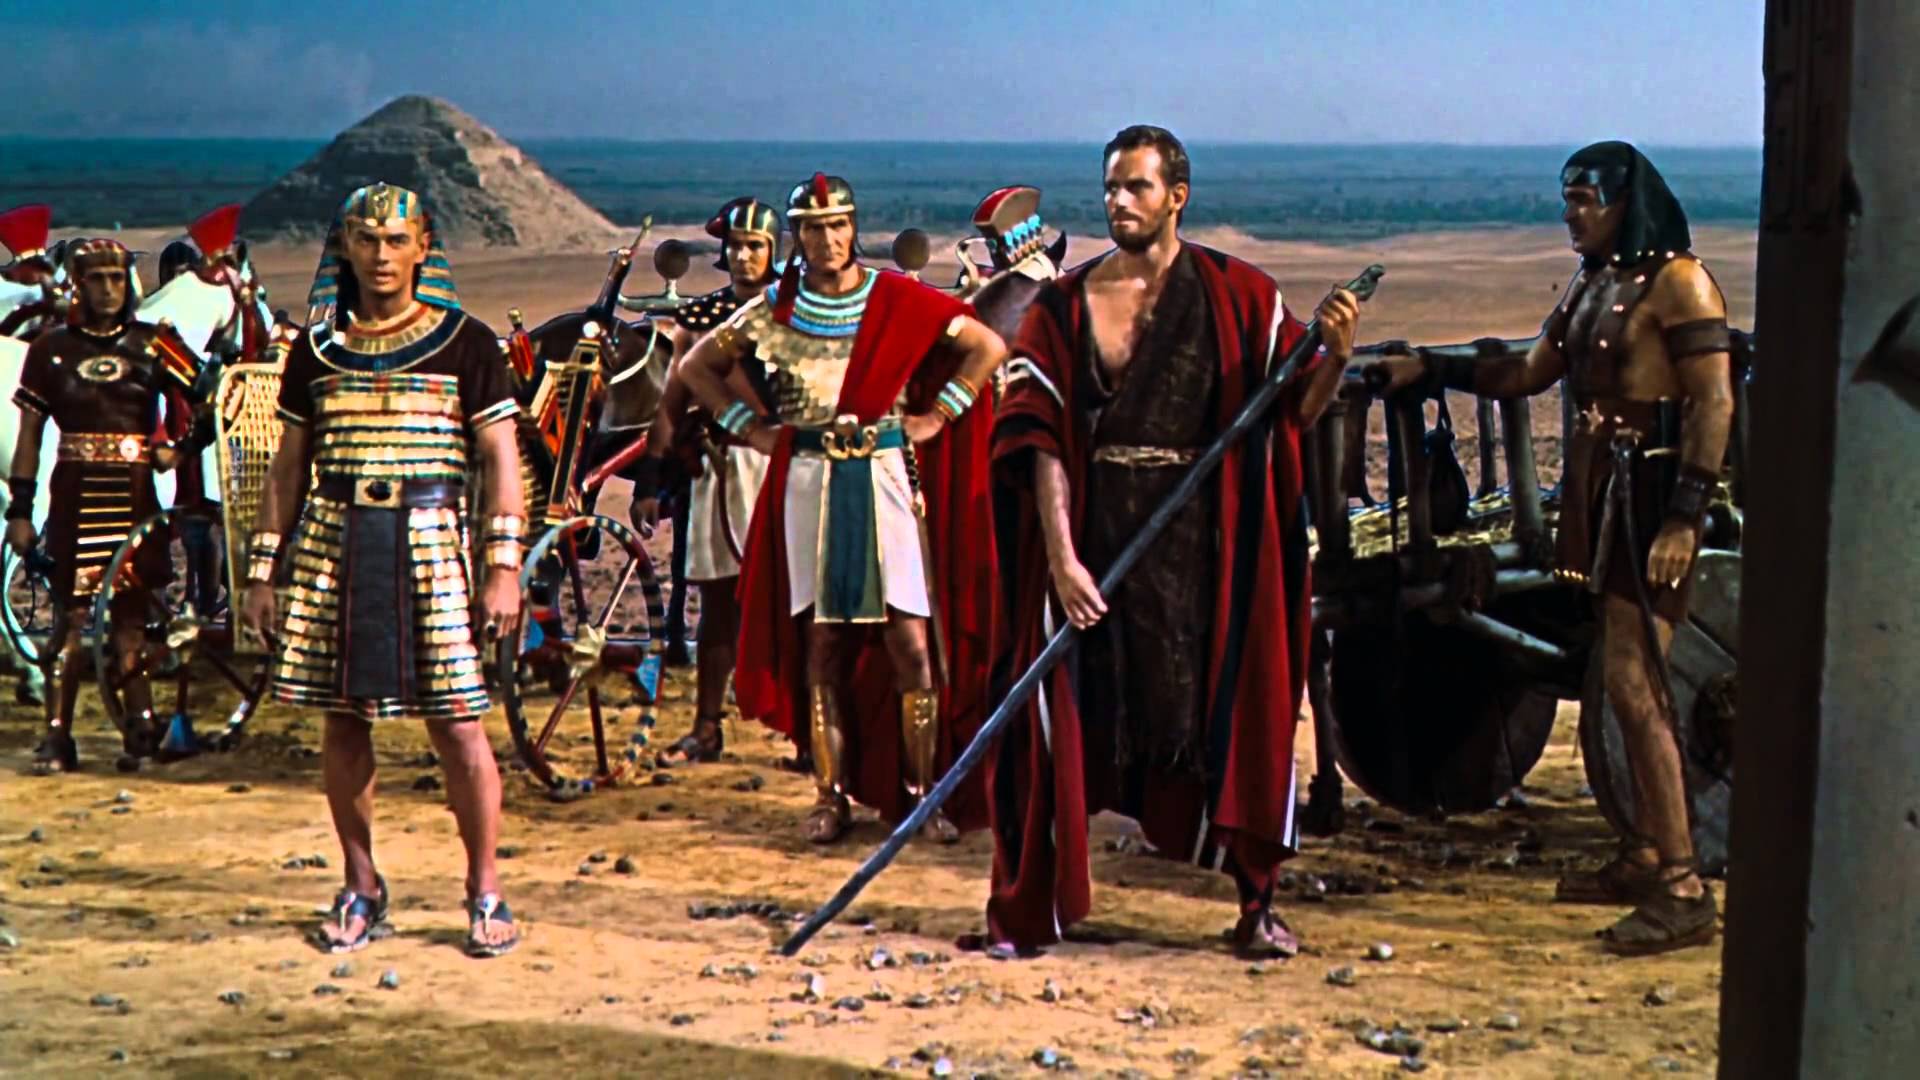 Special Theatrical Showing of “The Ten Commandments”